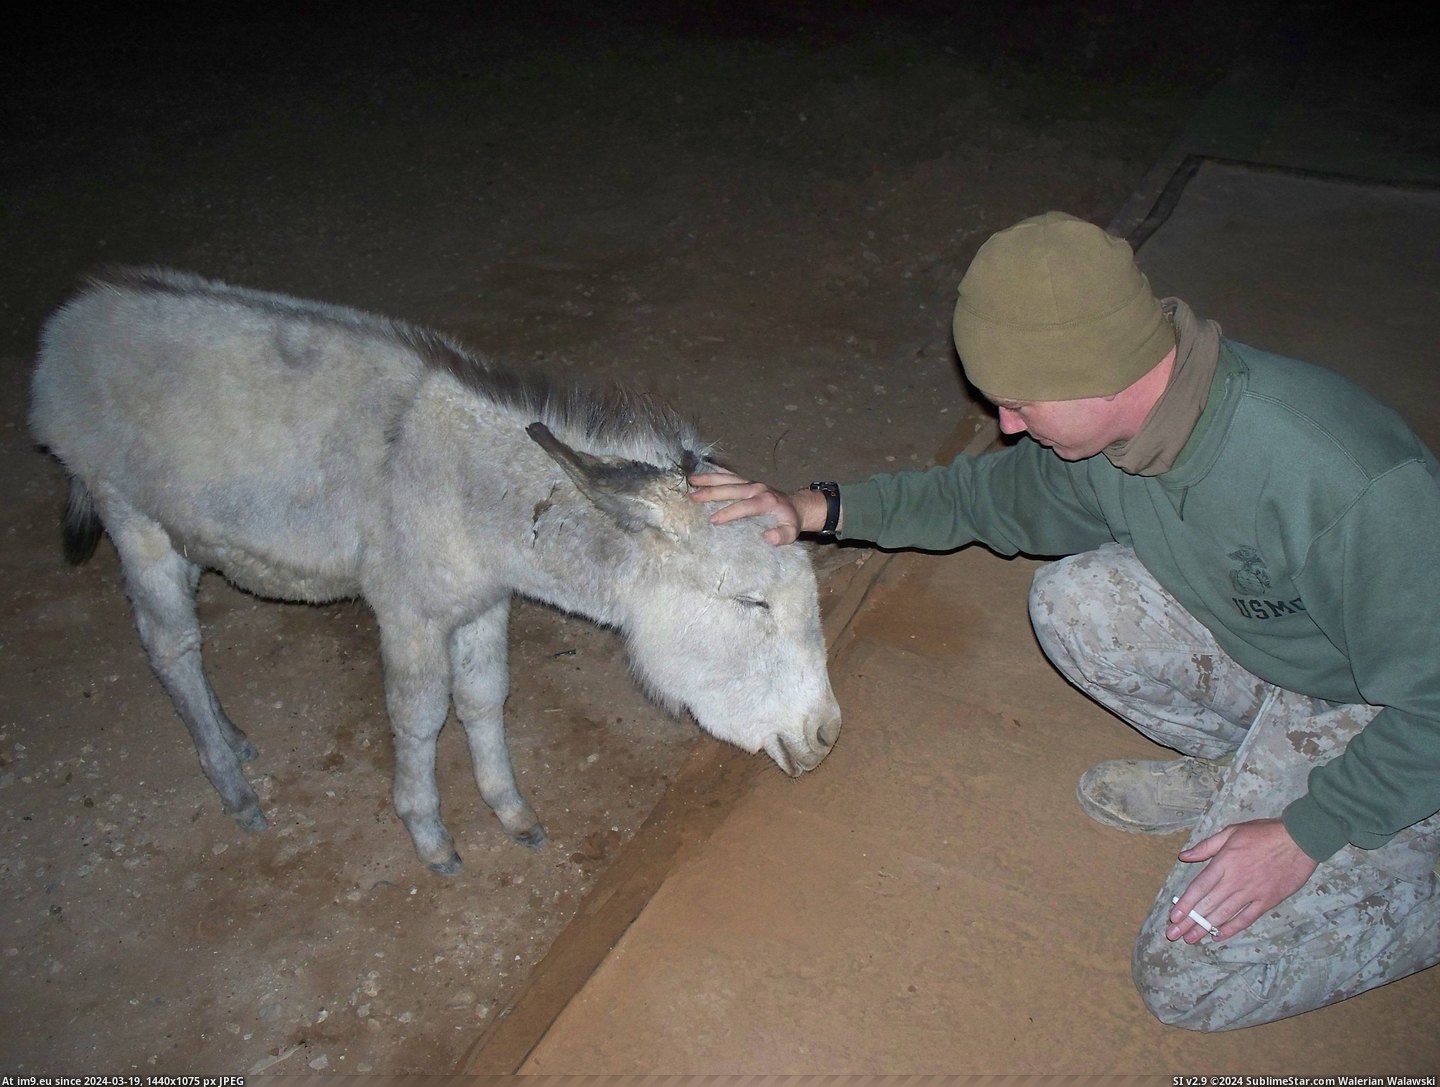 #Was #Had #Pet #Iraq #Donkey #Baby #Meet [Aww] When I was in Iraq, we had a pet donkey. Reddit, meet Baby! Pic. (Image of album My r/AWW favs))